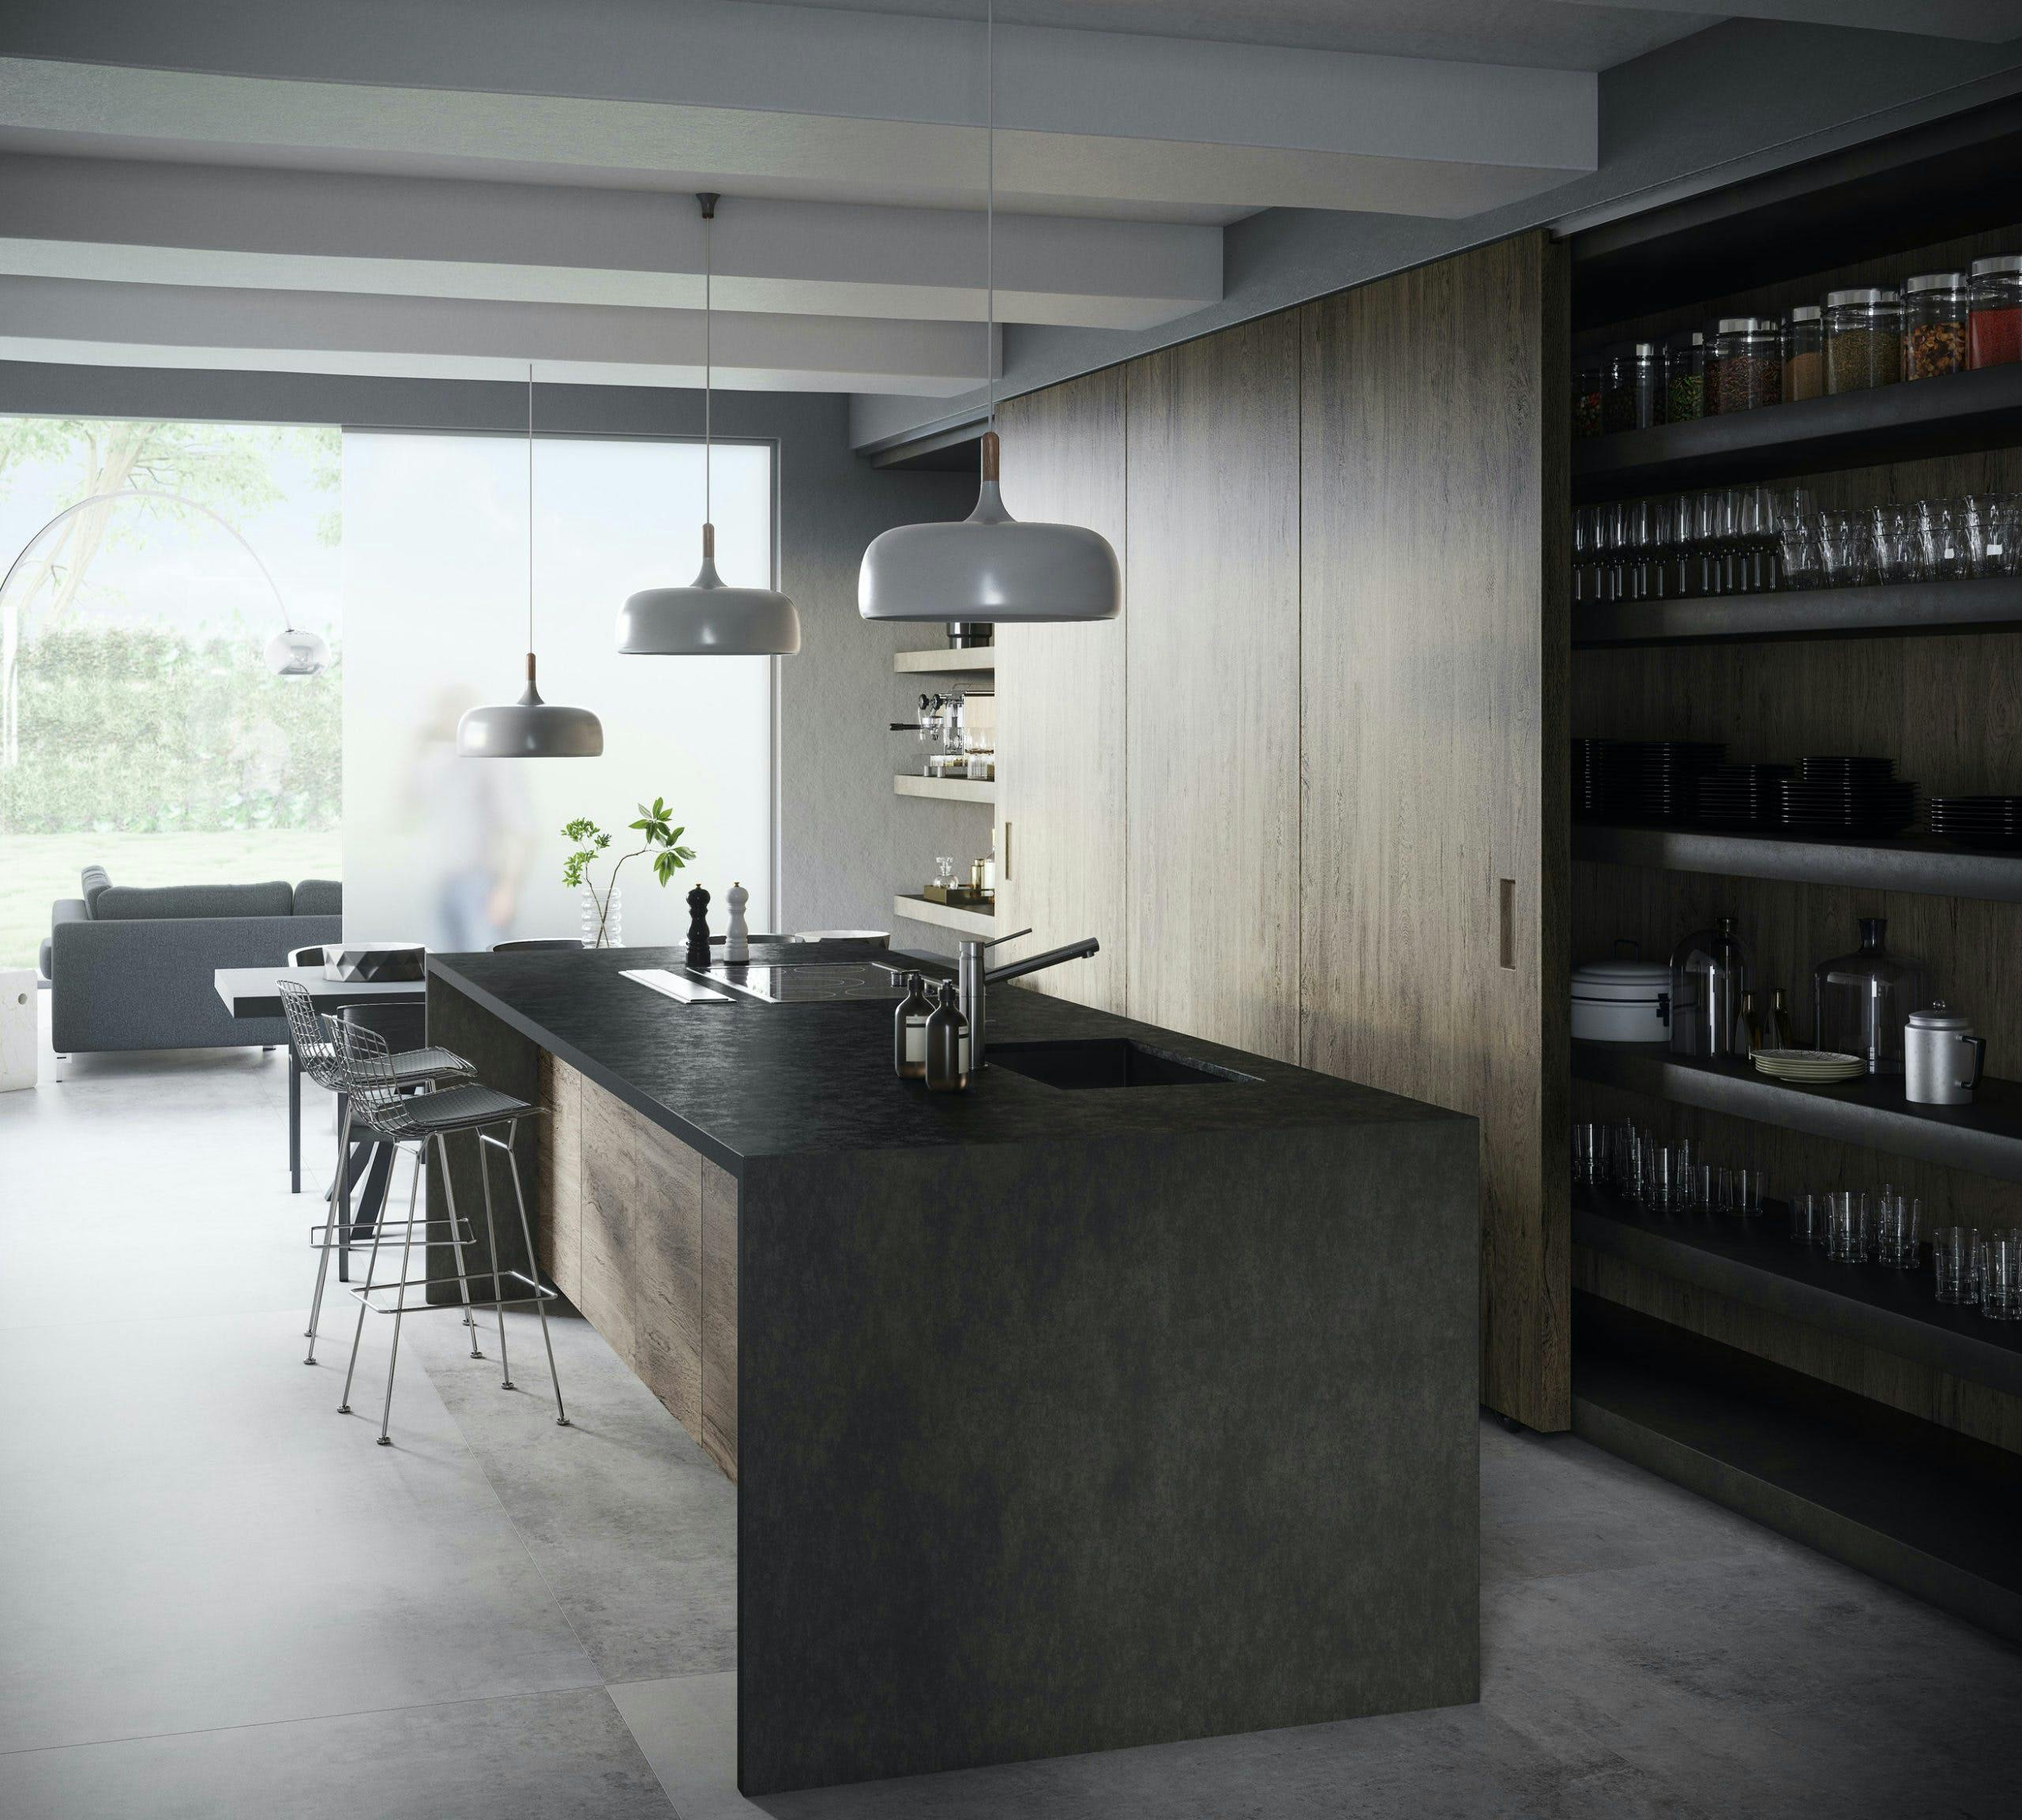 Image 31 of Dekton Kitchen Milar Resized 1 scaled 1 in How to organise your kitchen and keep it that way - Cosentino